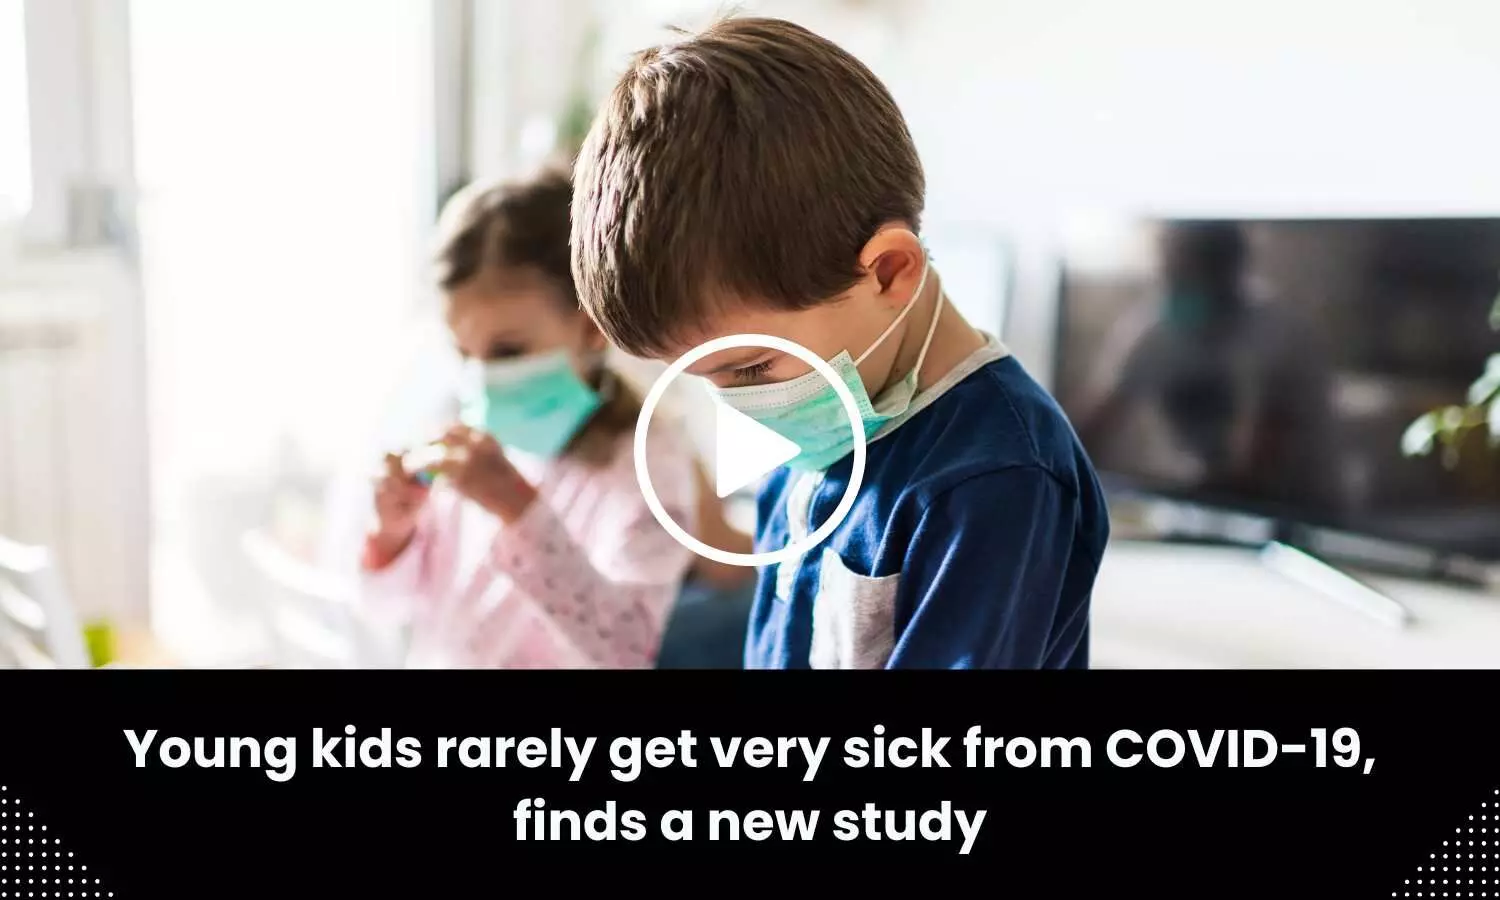 Young kids rarely get very sick from COVID-19, finds a new study